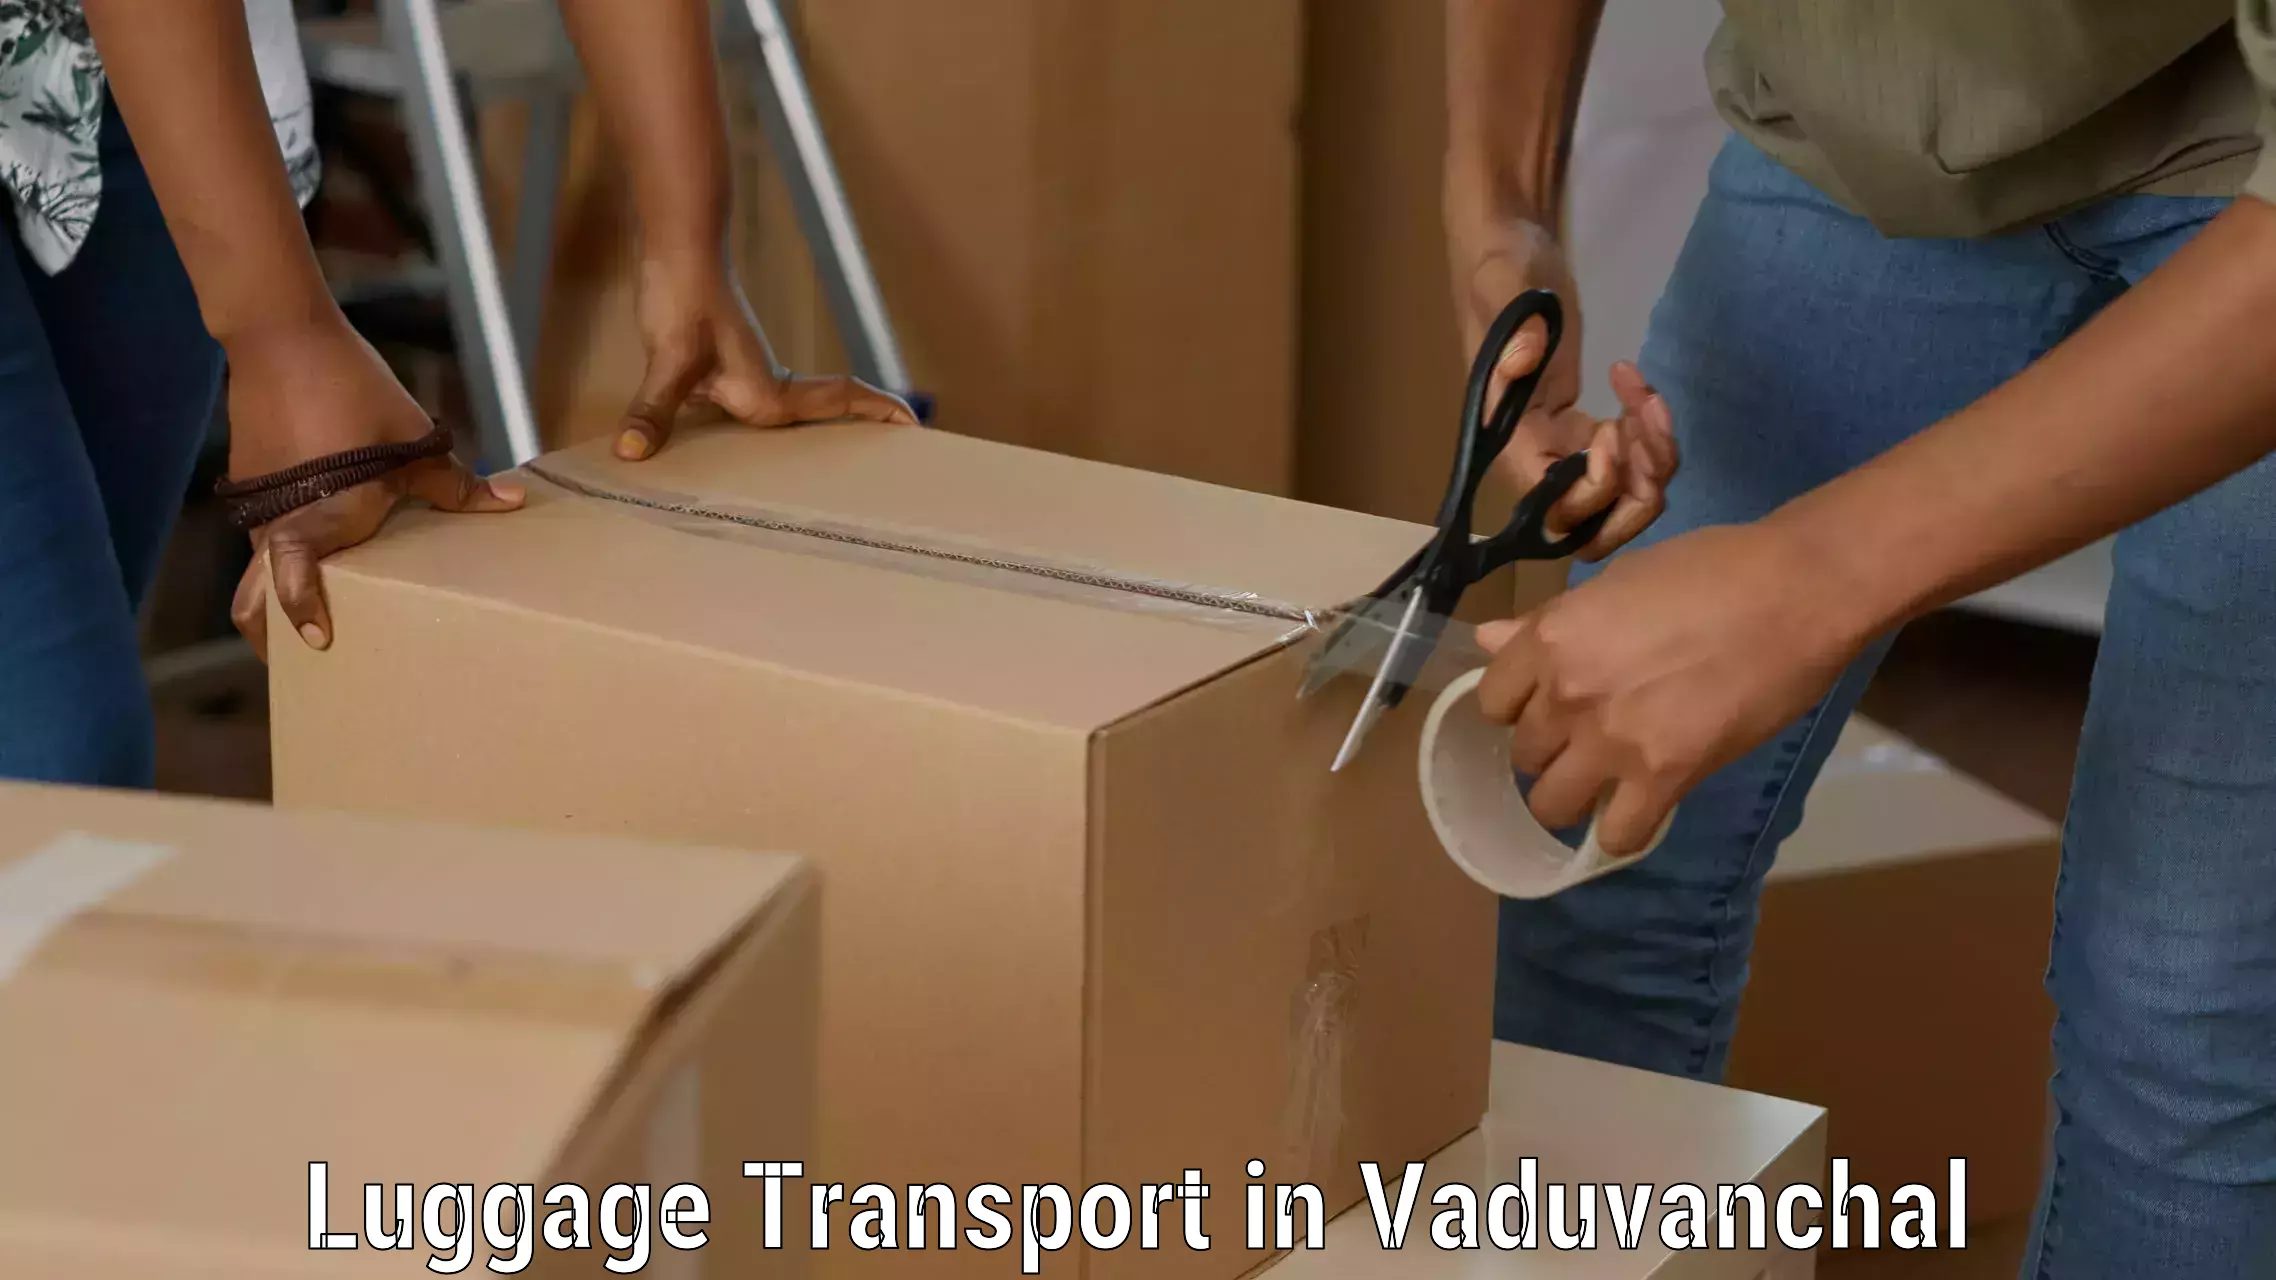 Domestic luggage transport in Vaduvanchal